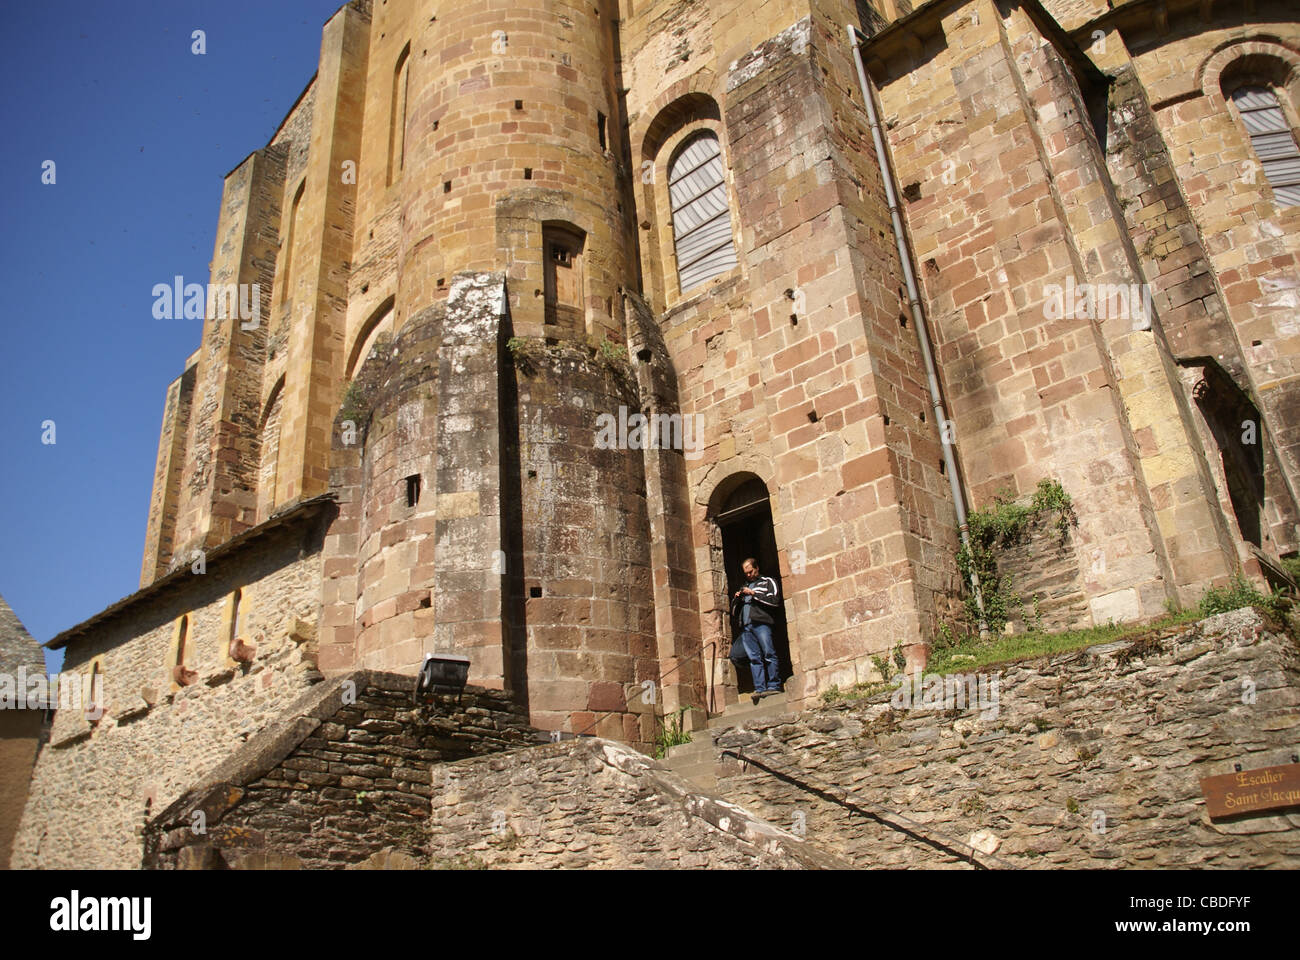 Romanesque tower and walls  of the Abbey Church of St. Foy, Conques, France Stock Photo